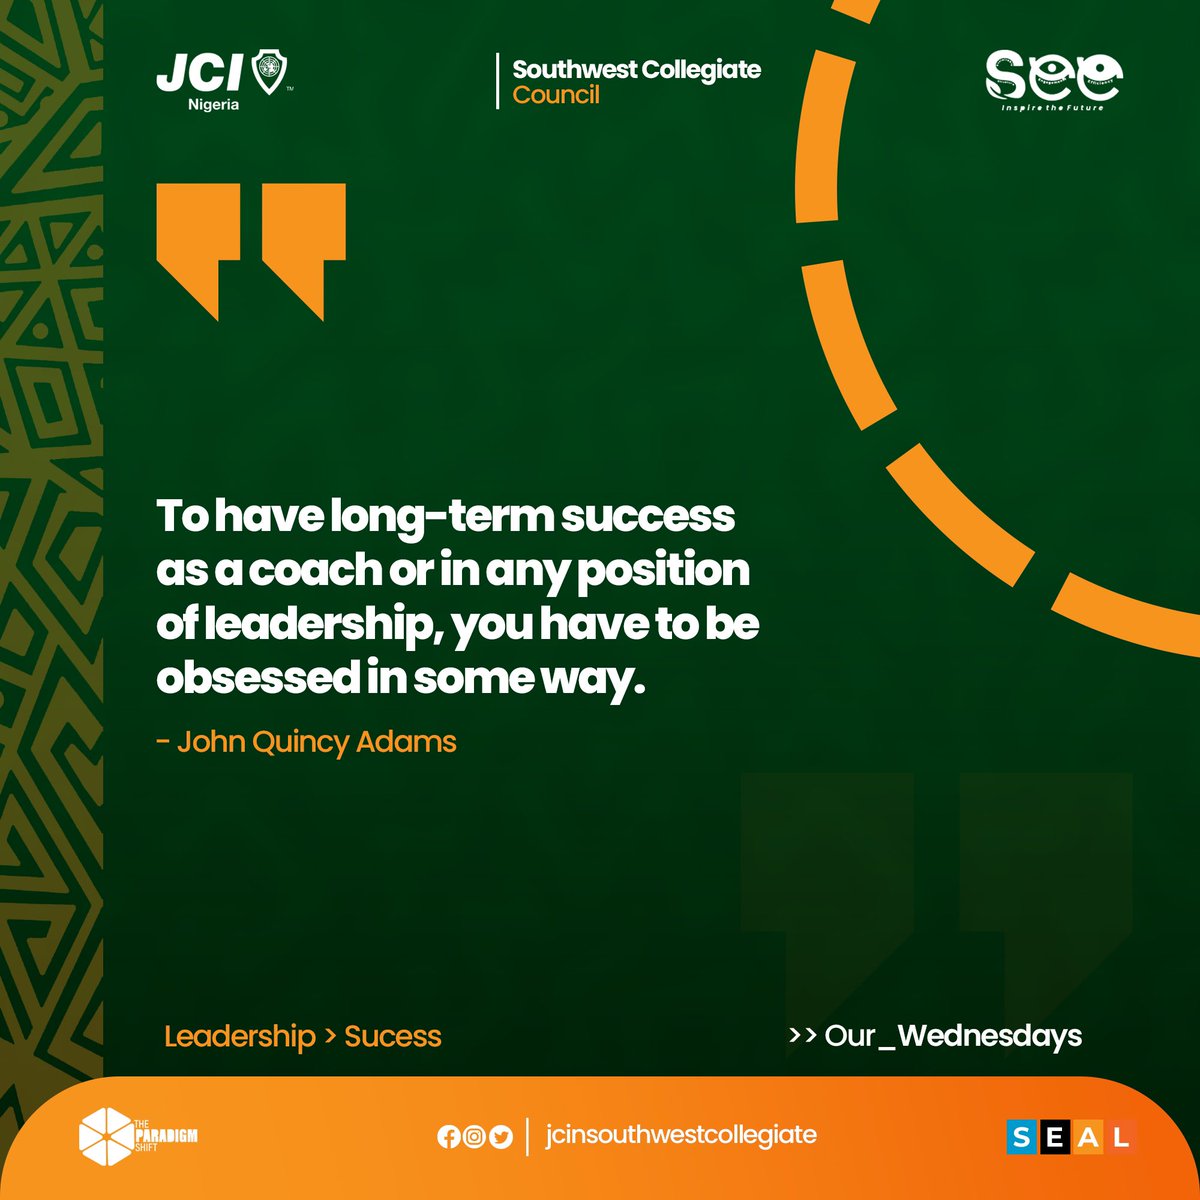 This edition connects leadership and obsession

Enjoy 👌
#OurWednesdays #jci #jcinigeria #jcinigeriacollegiate #jcinigeriasouthwest #jcinigeriasouthwestcollegiate #seal #see #paradigmshift #motivation #wednesday #wednesdaywisdom